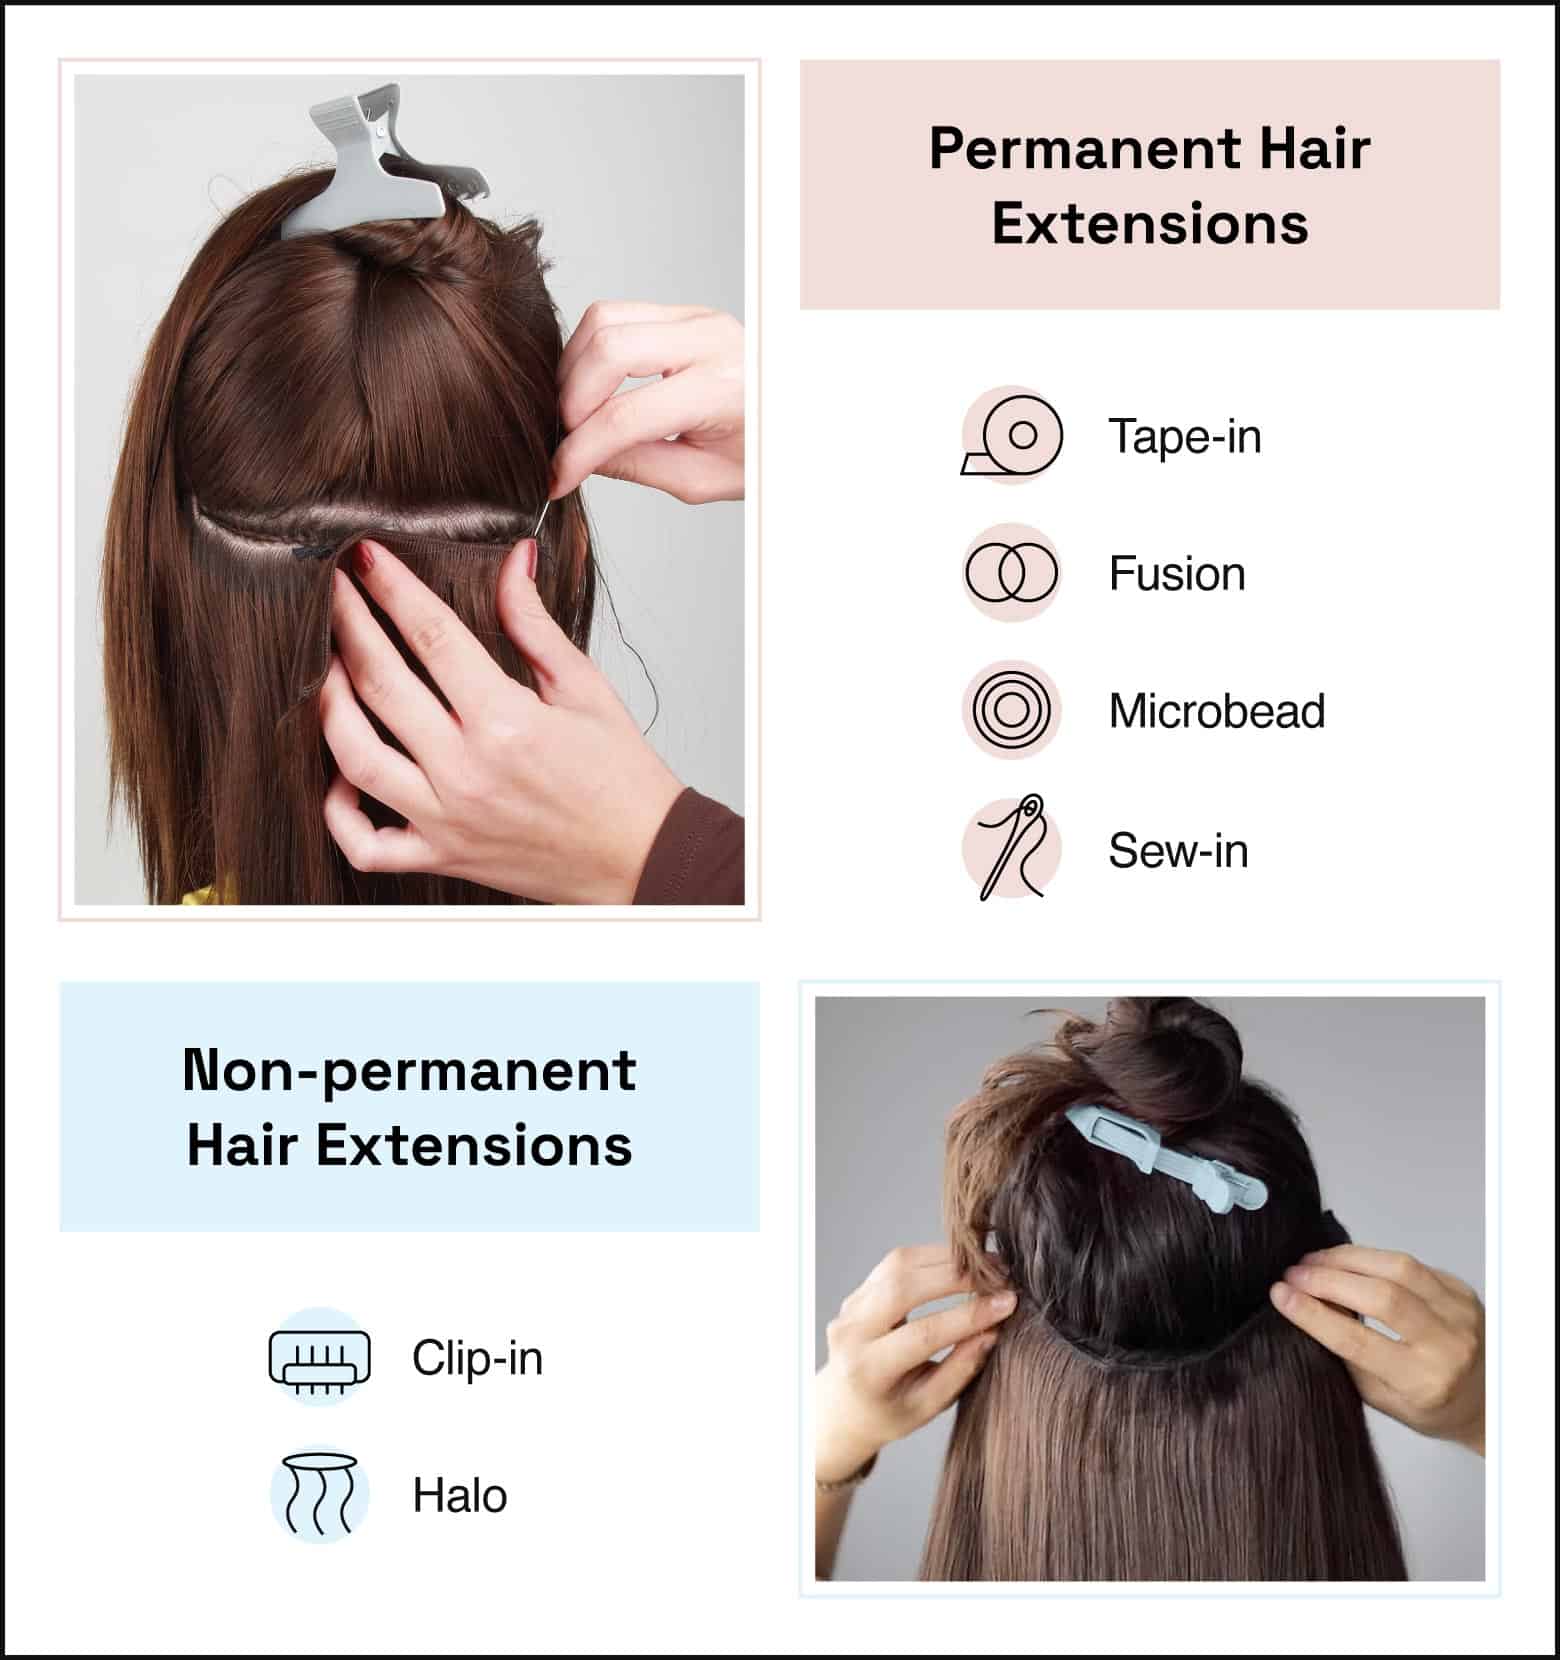 How Much Are Hair Extensions? - StyleSeat